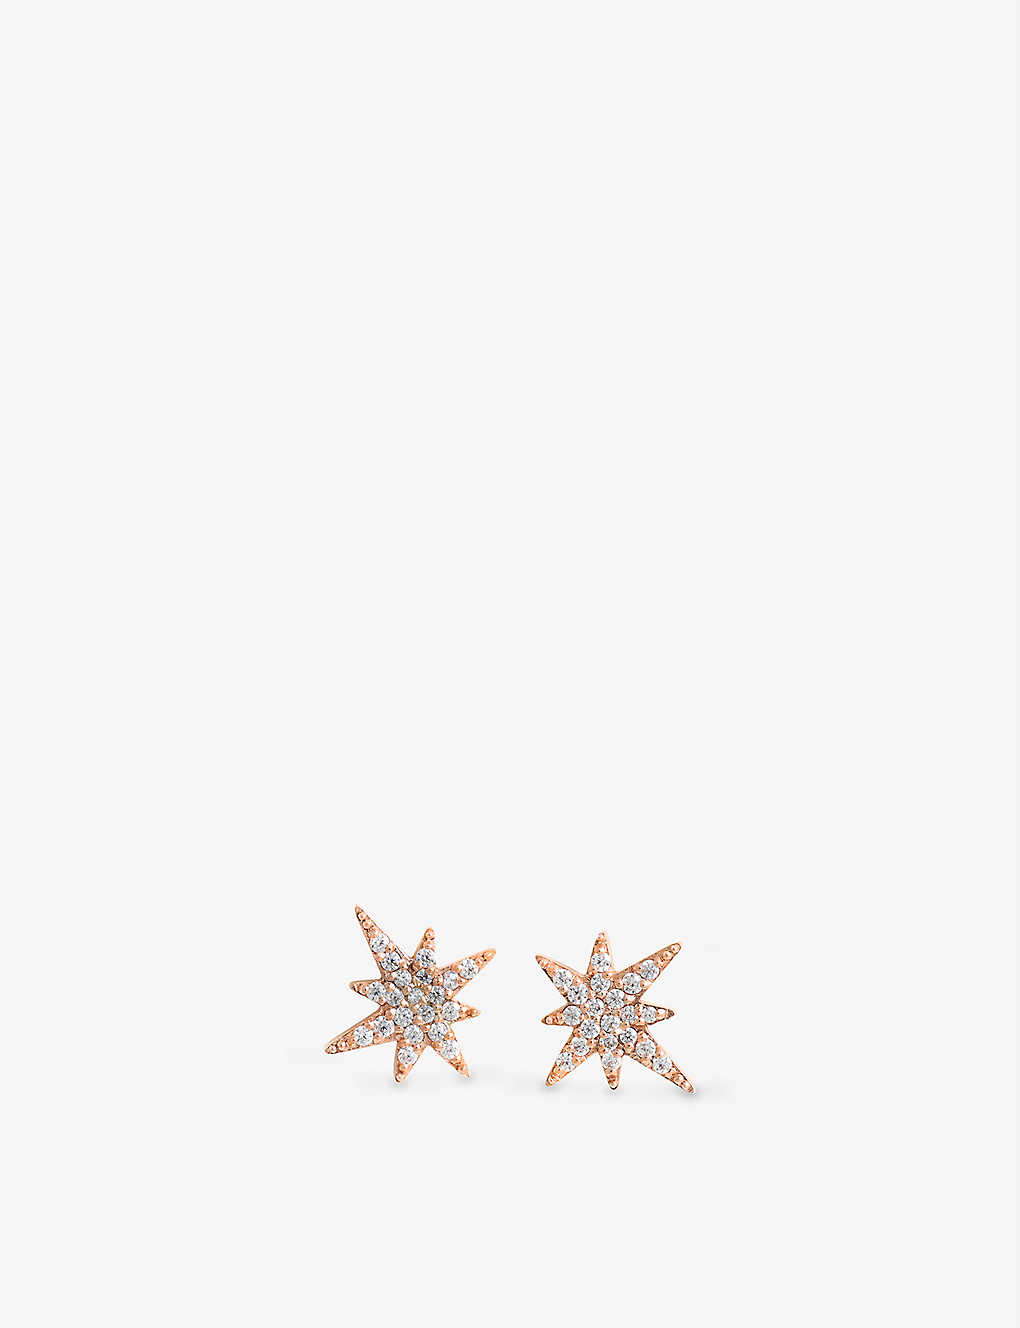 La Maison Couture Myriam Soseilos Astral 9ct Rose-gold And White Sapphire Stud Earrings In Rose Gold